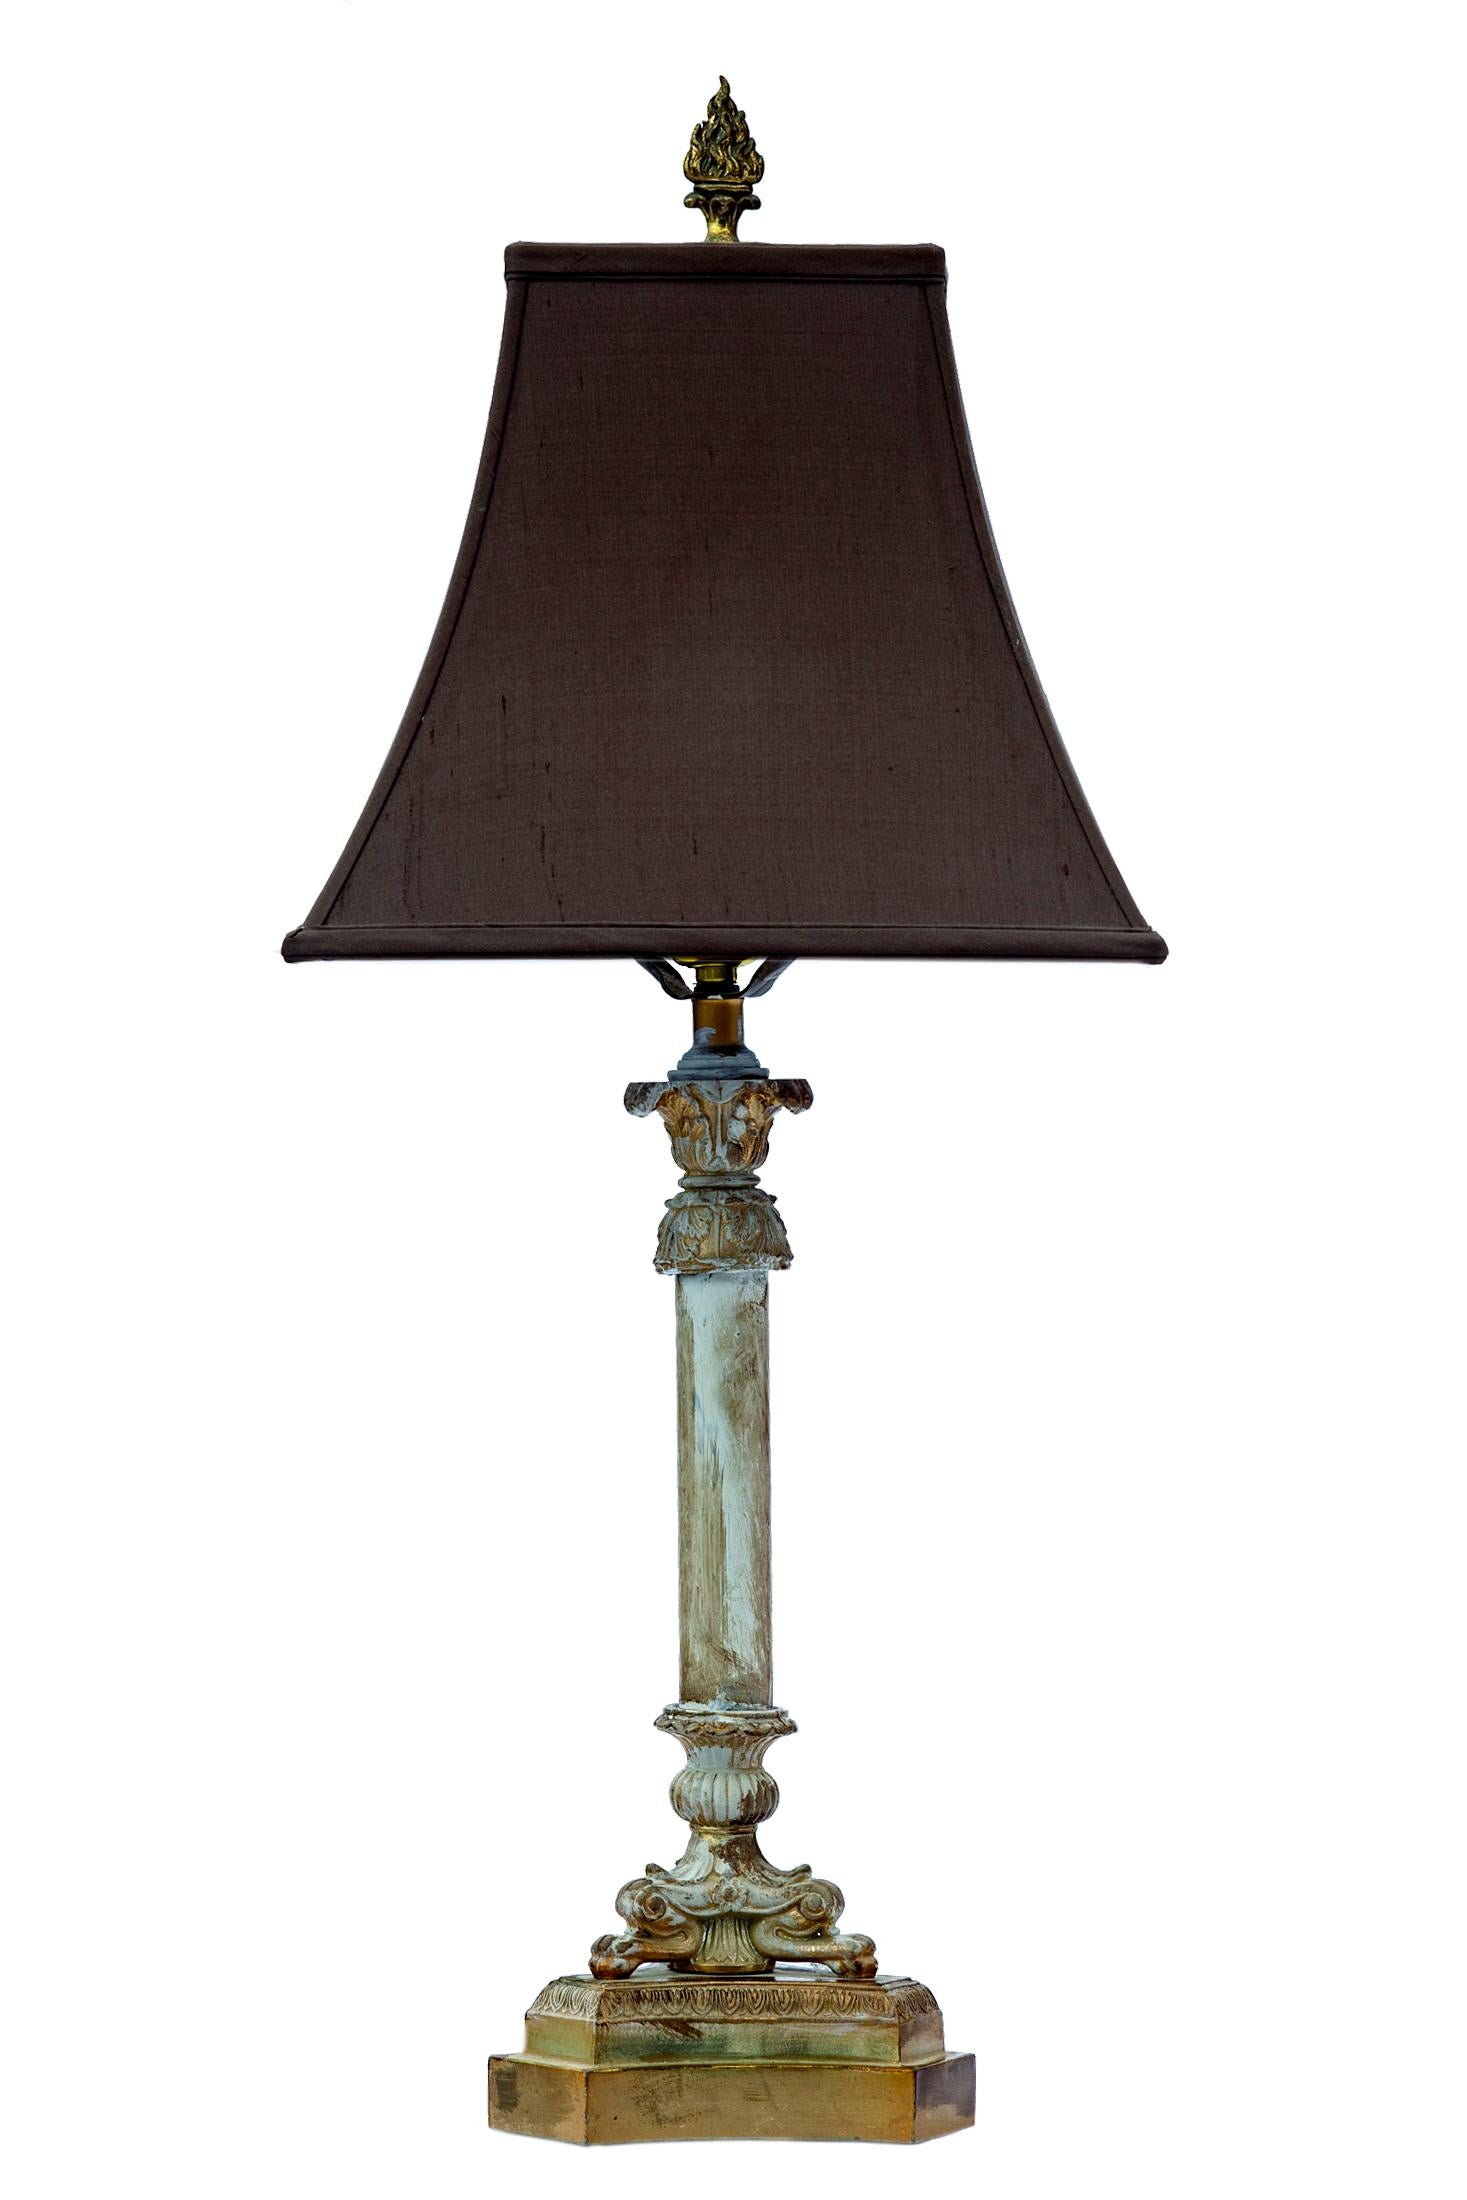 Classical style table lamp with brass base and hand painted glass column.
RH Silk shade included.
Shade:
Base size 11